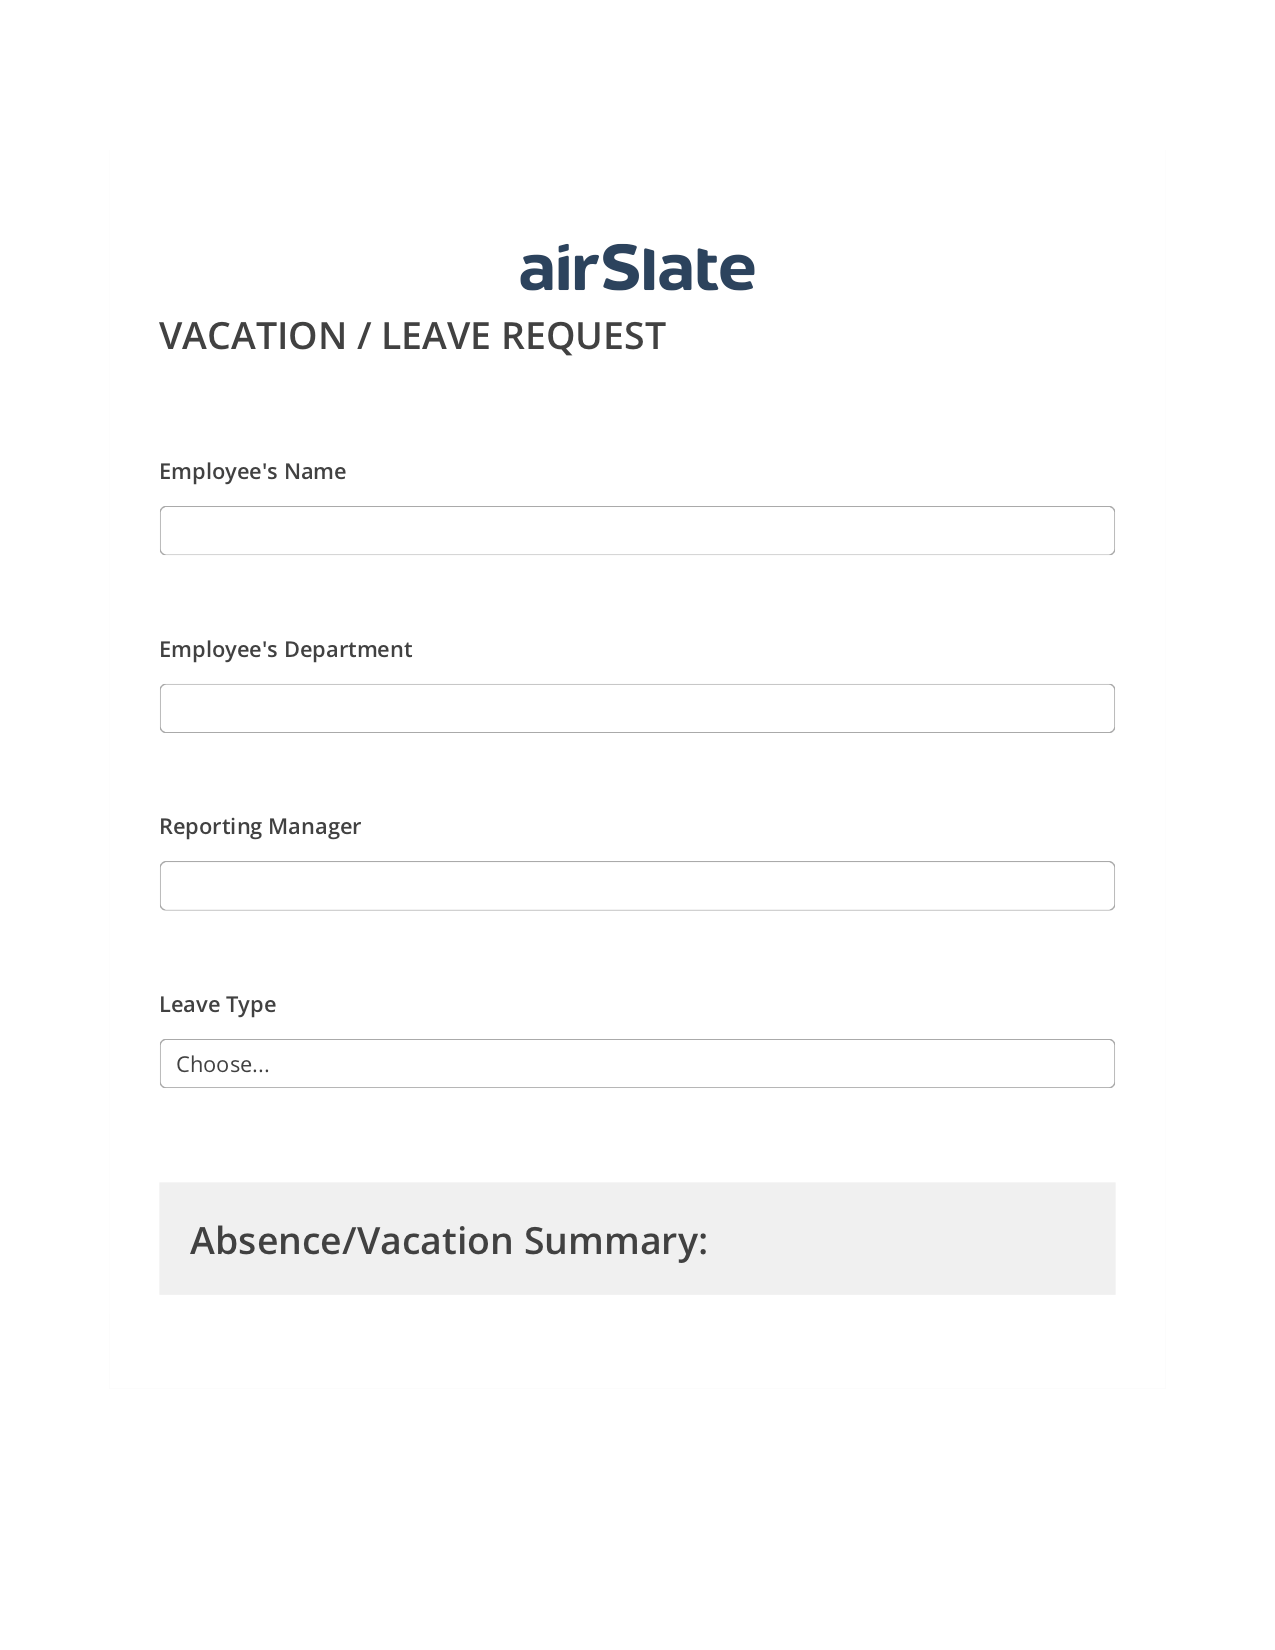 Vacation/Leave Request Workflow Pre-fill from Excel Spreadsheet Bot, System Bot - Create a Slate in another Flow, Export to Smartsheet